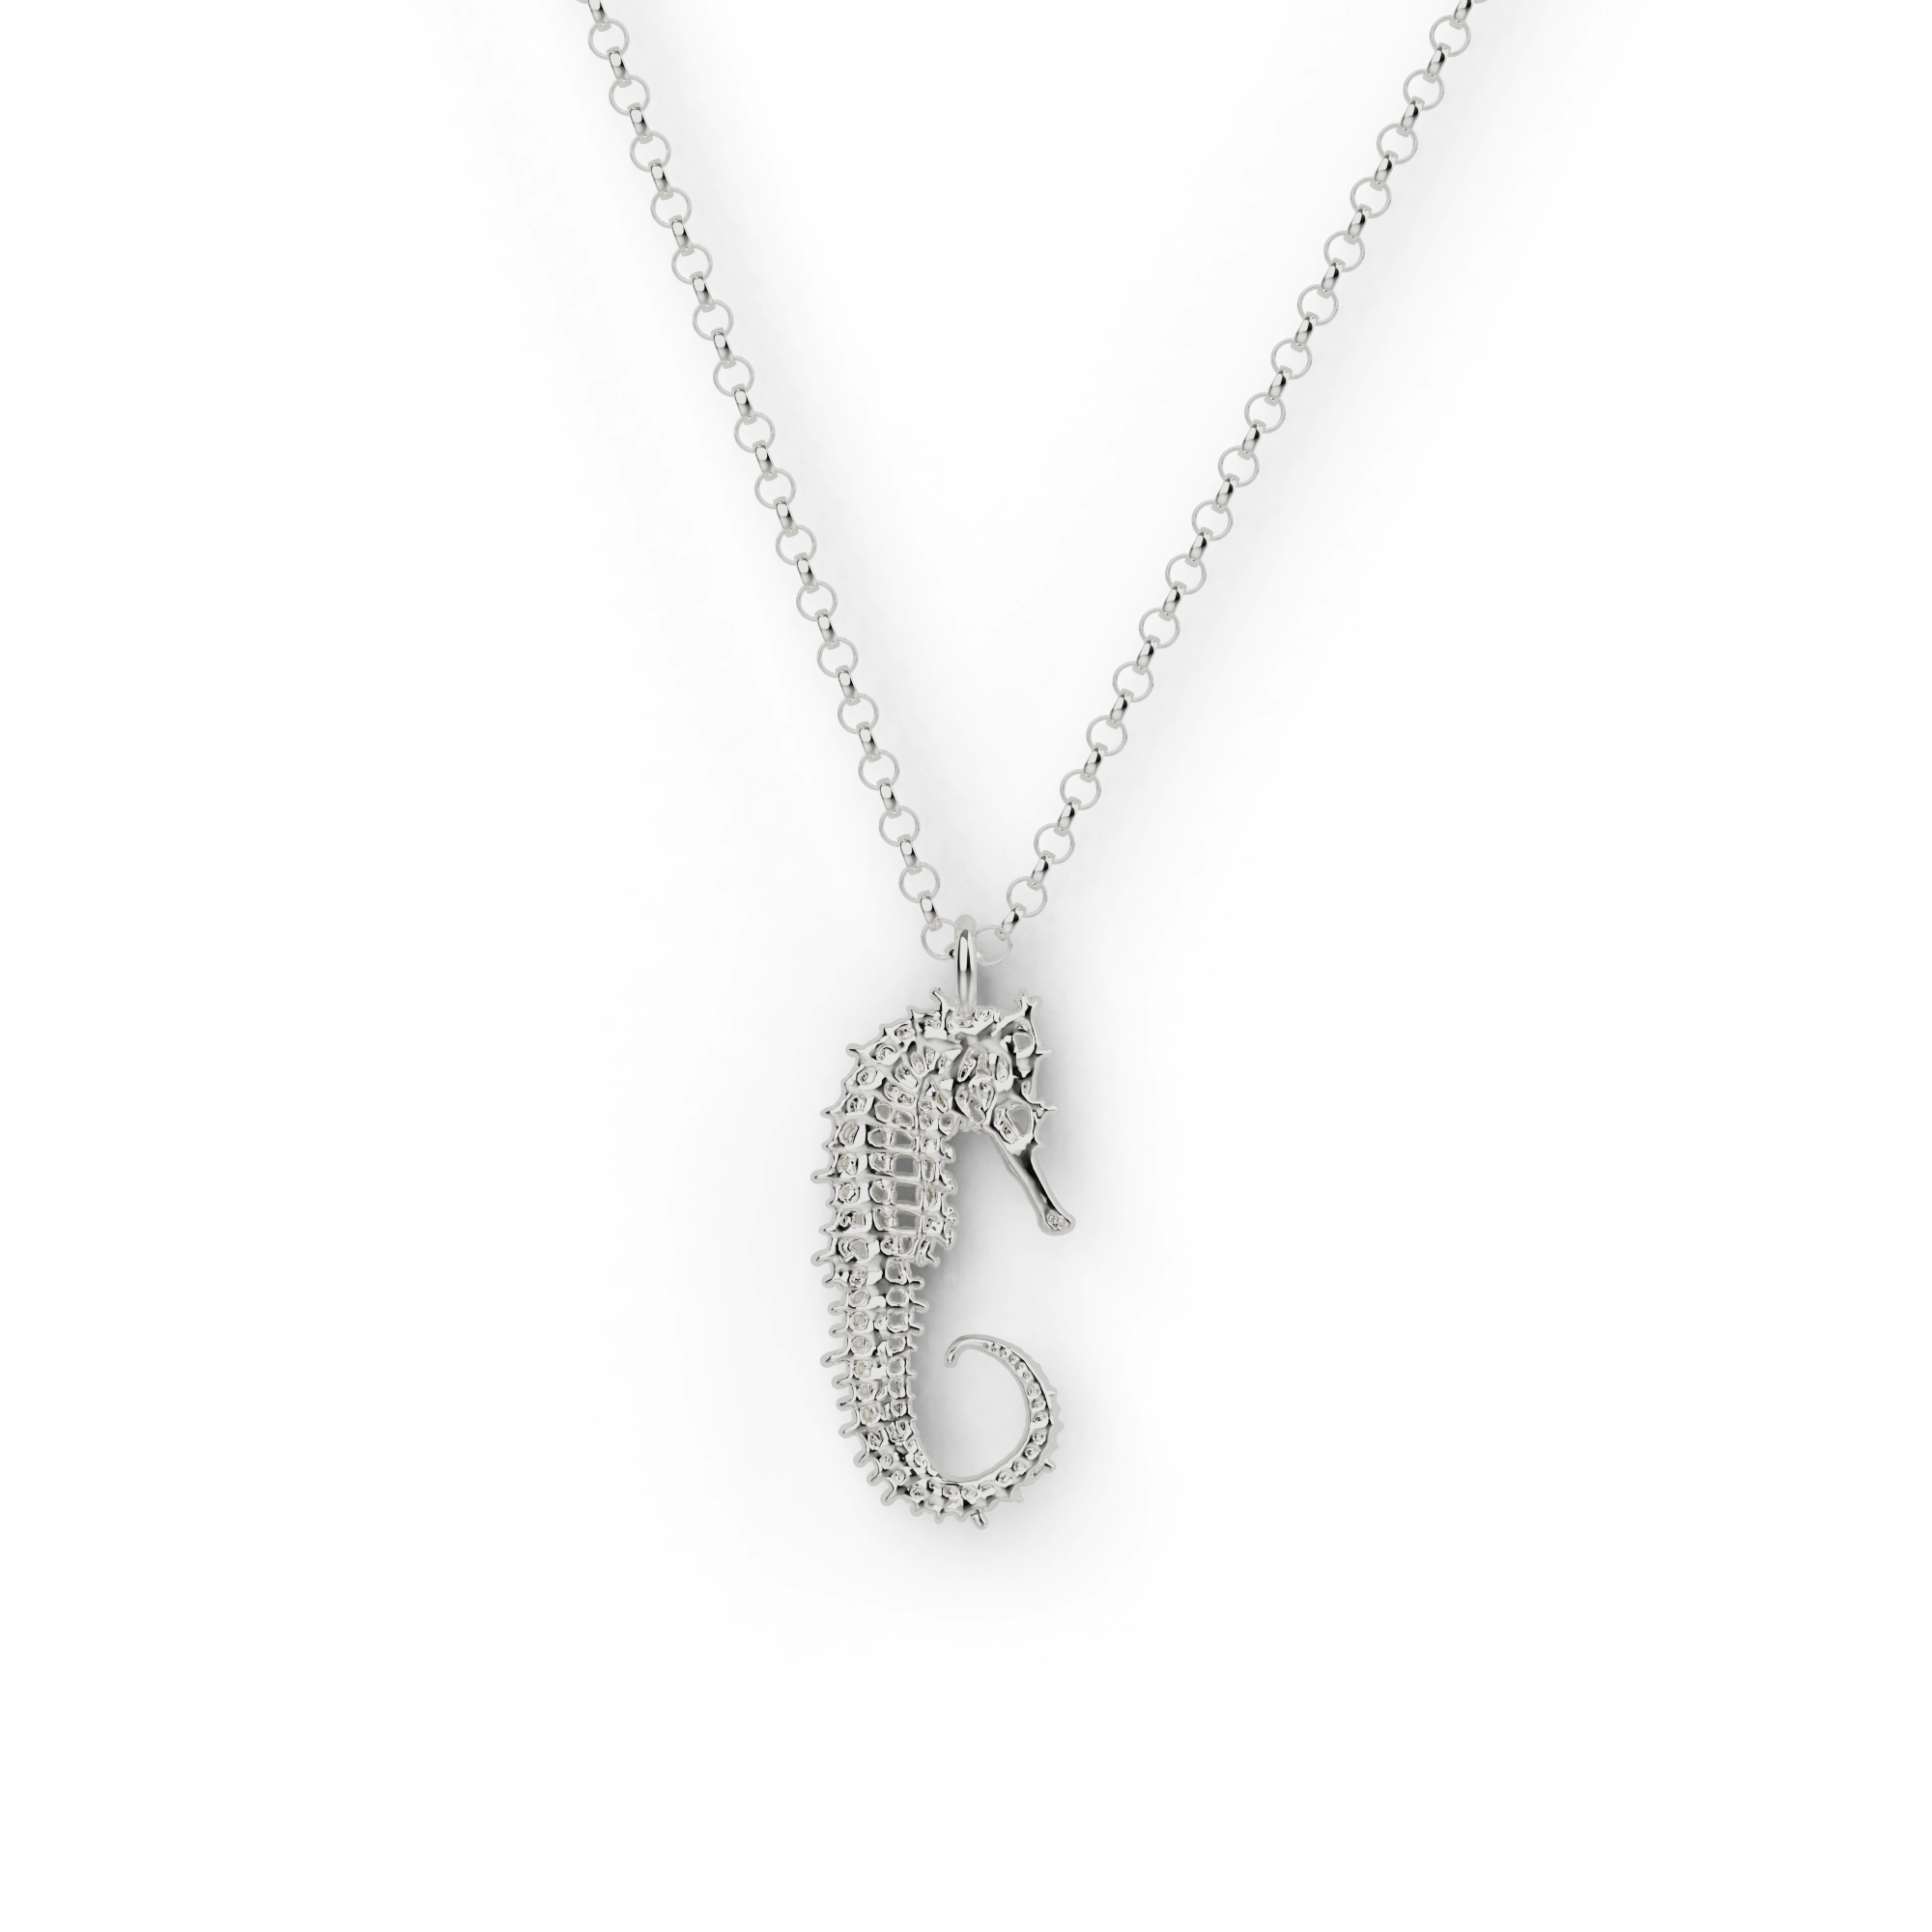 VONALA Moonstone Seahorse Necklace 925 Sterling Silver Starfish Seahorse  Pendant Necklace Ocean Animal Jewelry for Women Girls : Amazon.co.uk:  Fashion